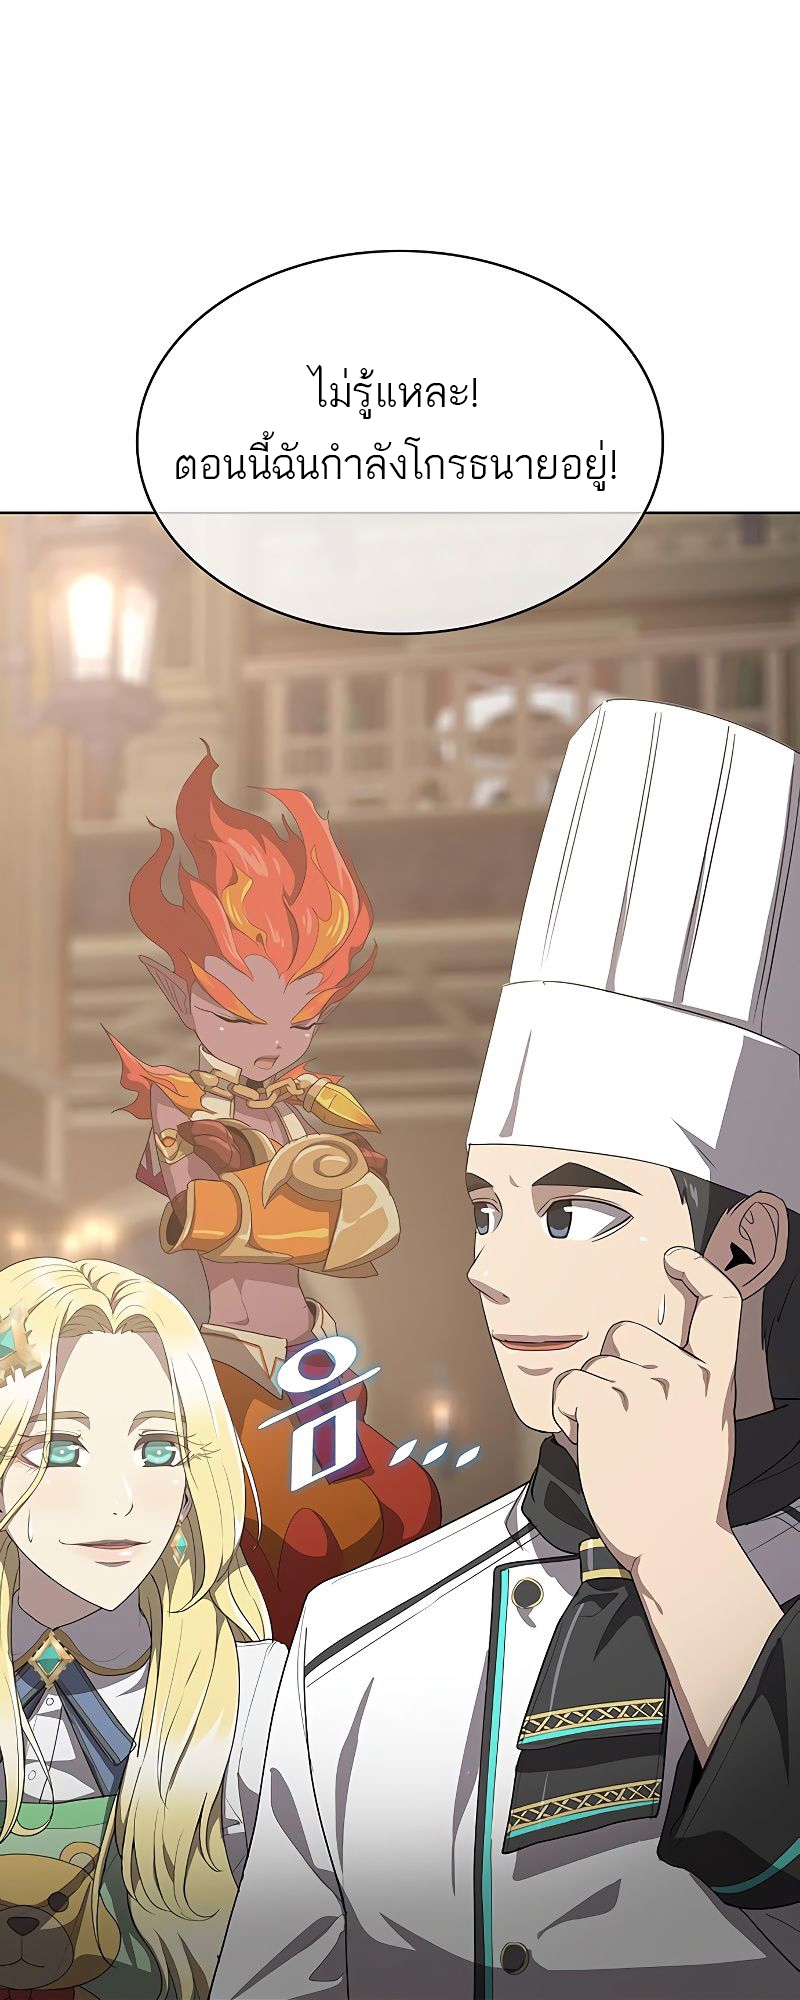 The Strongest Chef in Another World 13 19 04 25670017